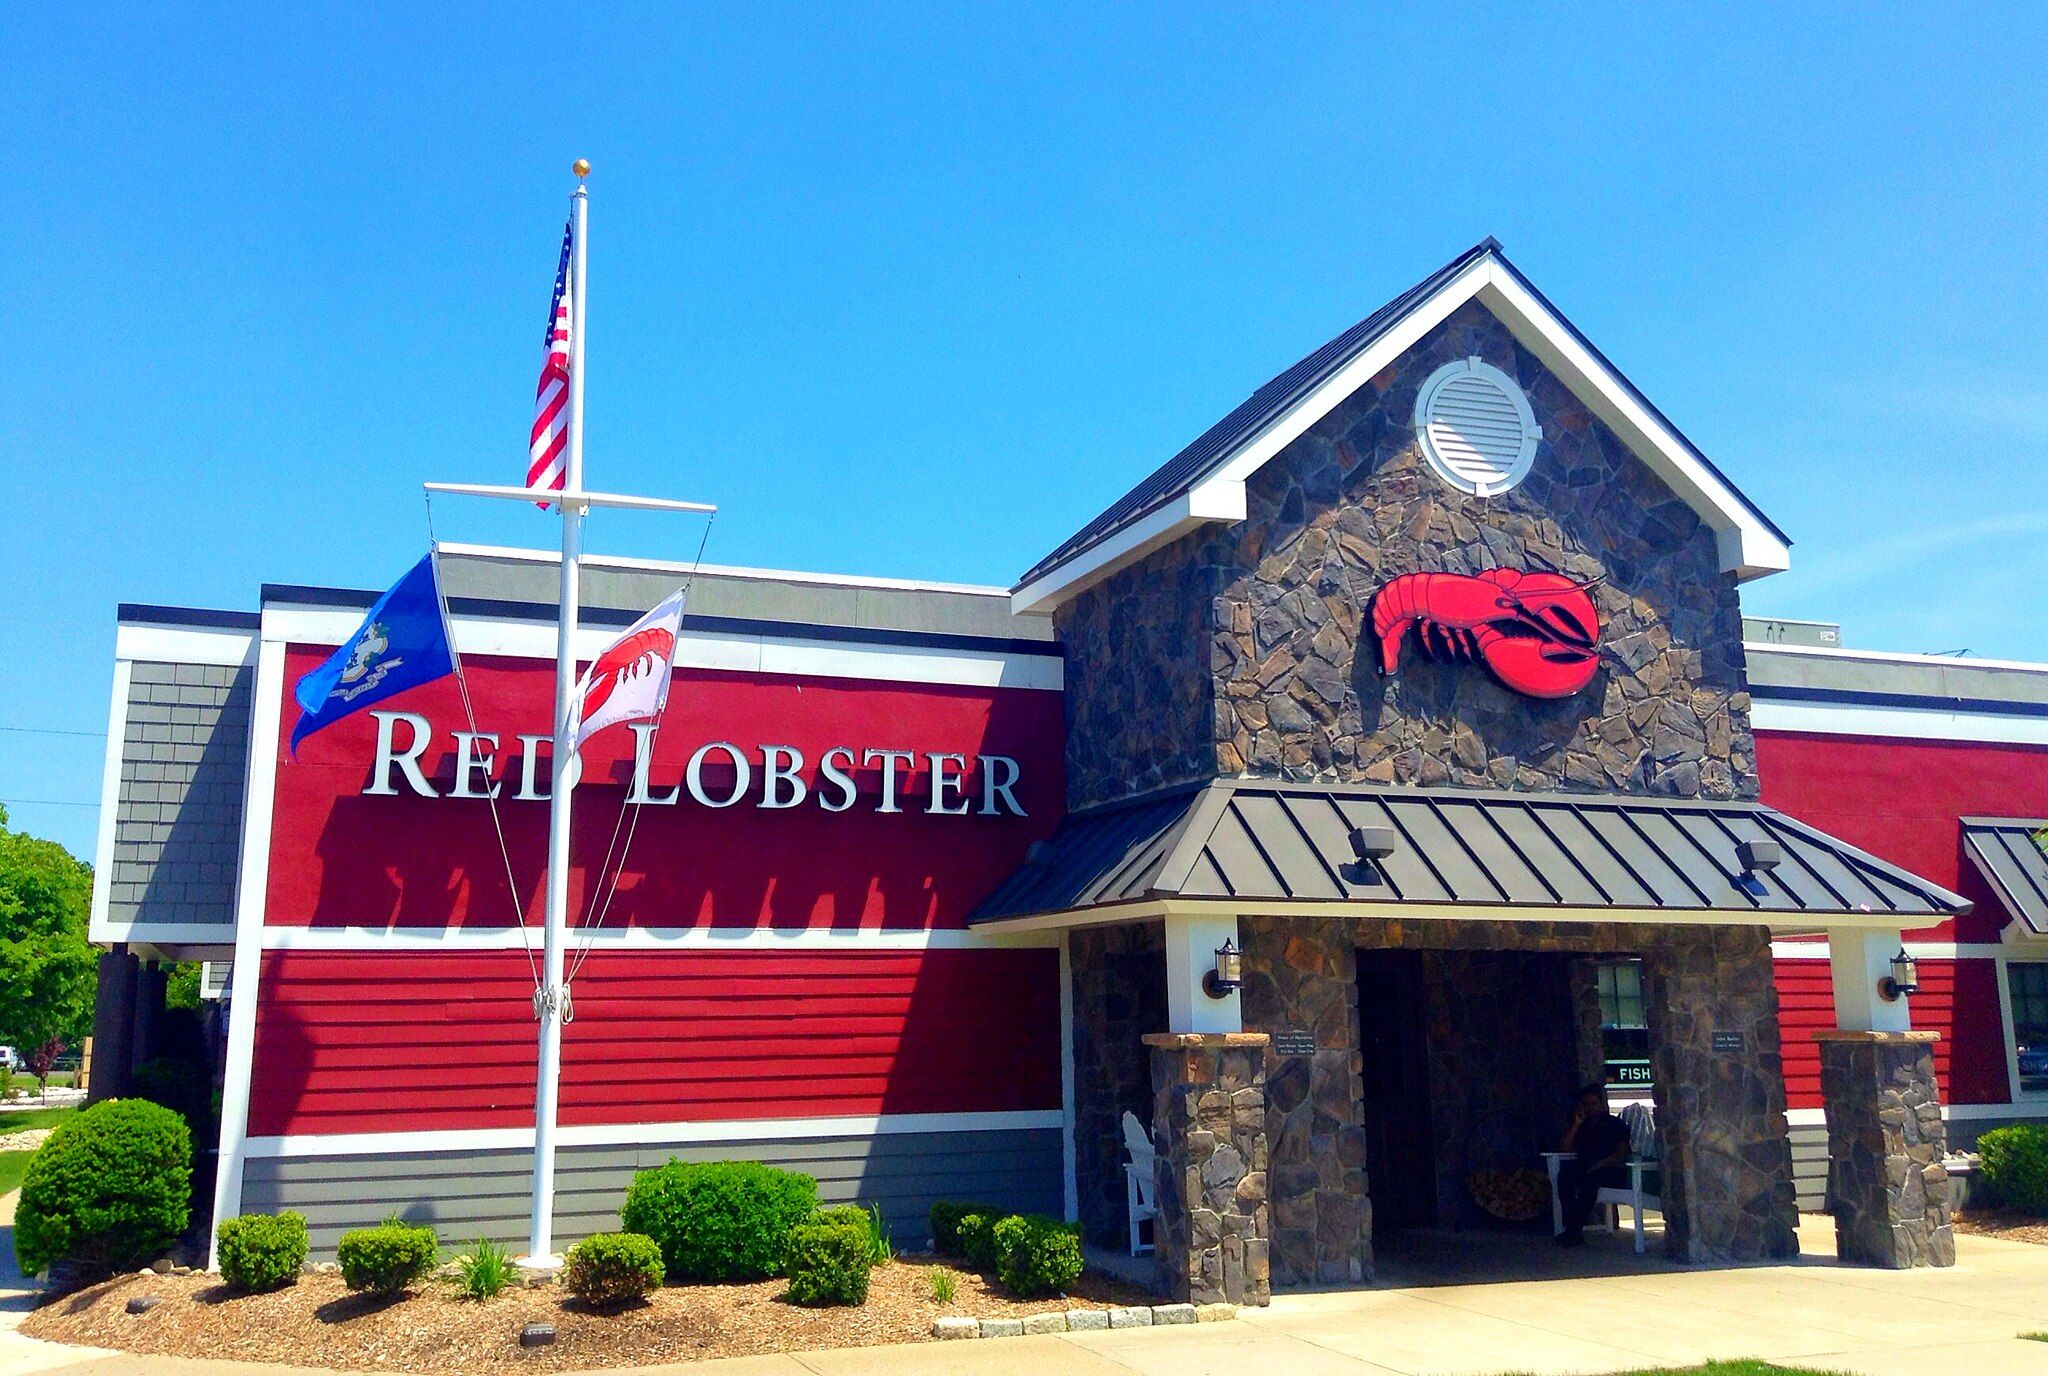 Red_Lobster during the day